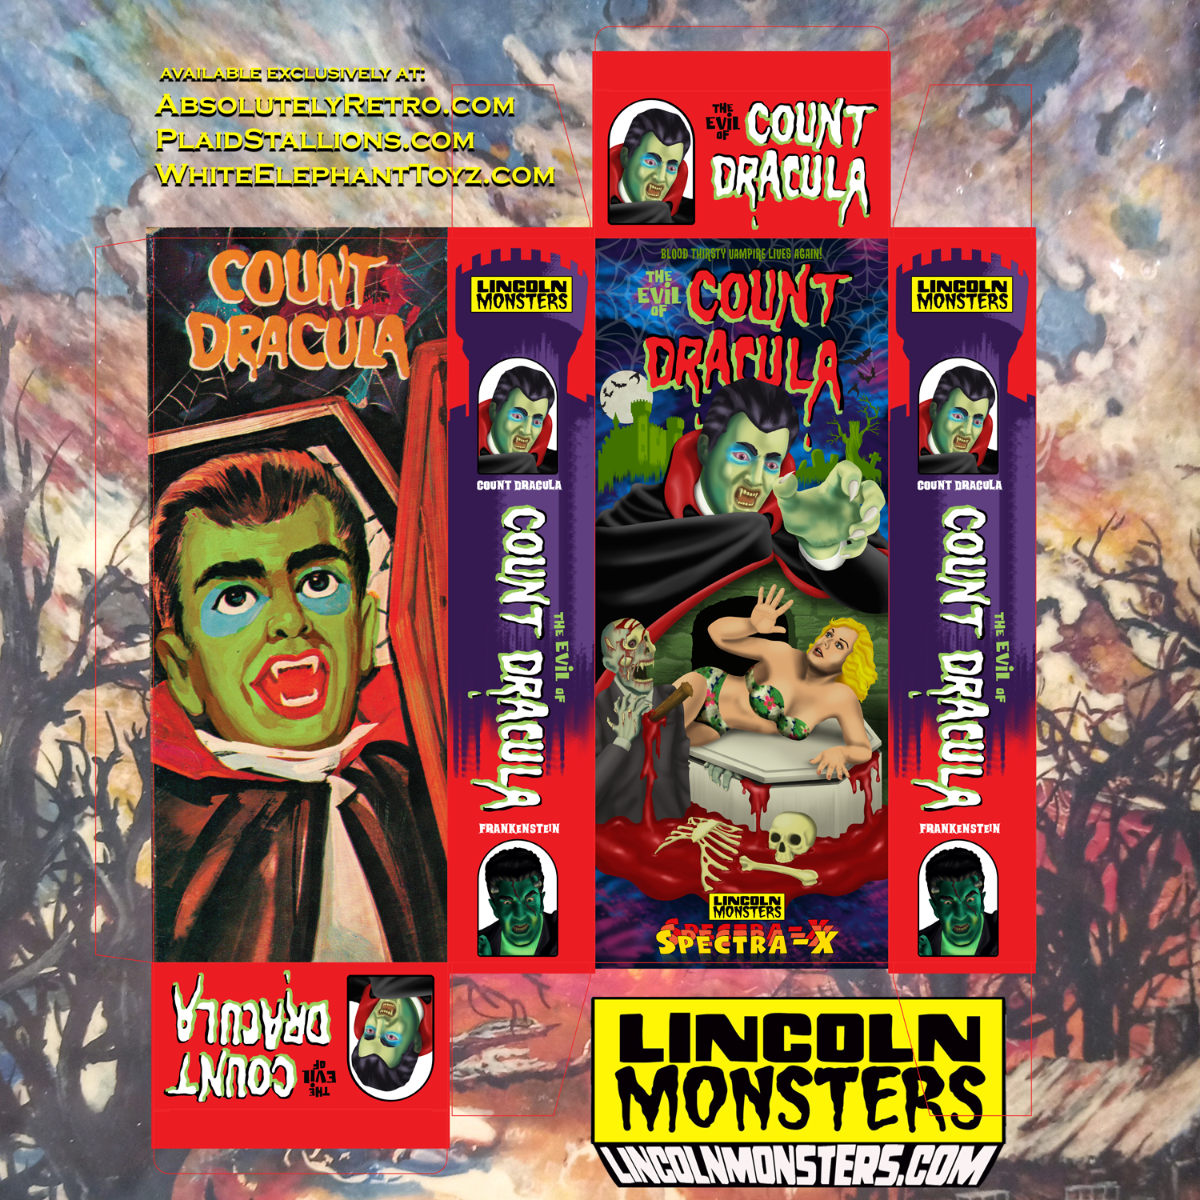 Lincoln Monsters Packaging Reveal “The Evil of Count Dracula”